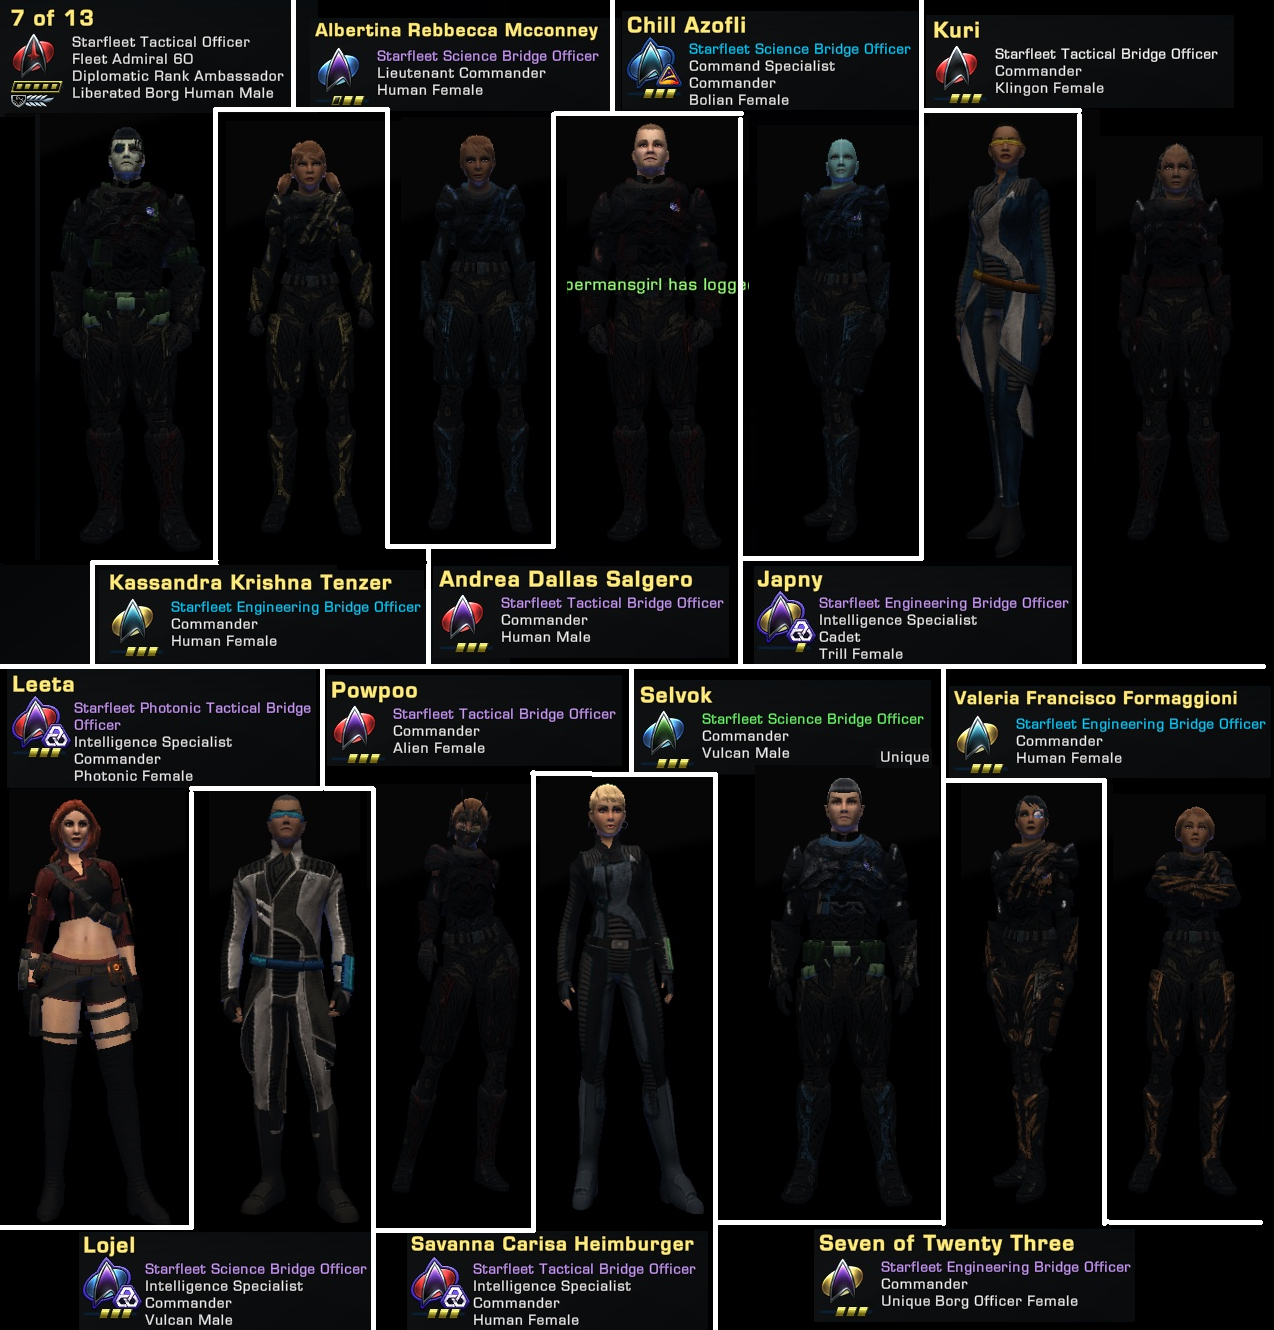 7_of_13_crew_by_marhawkman-dao2y66.png